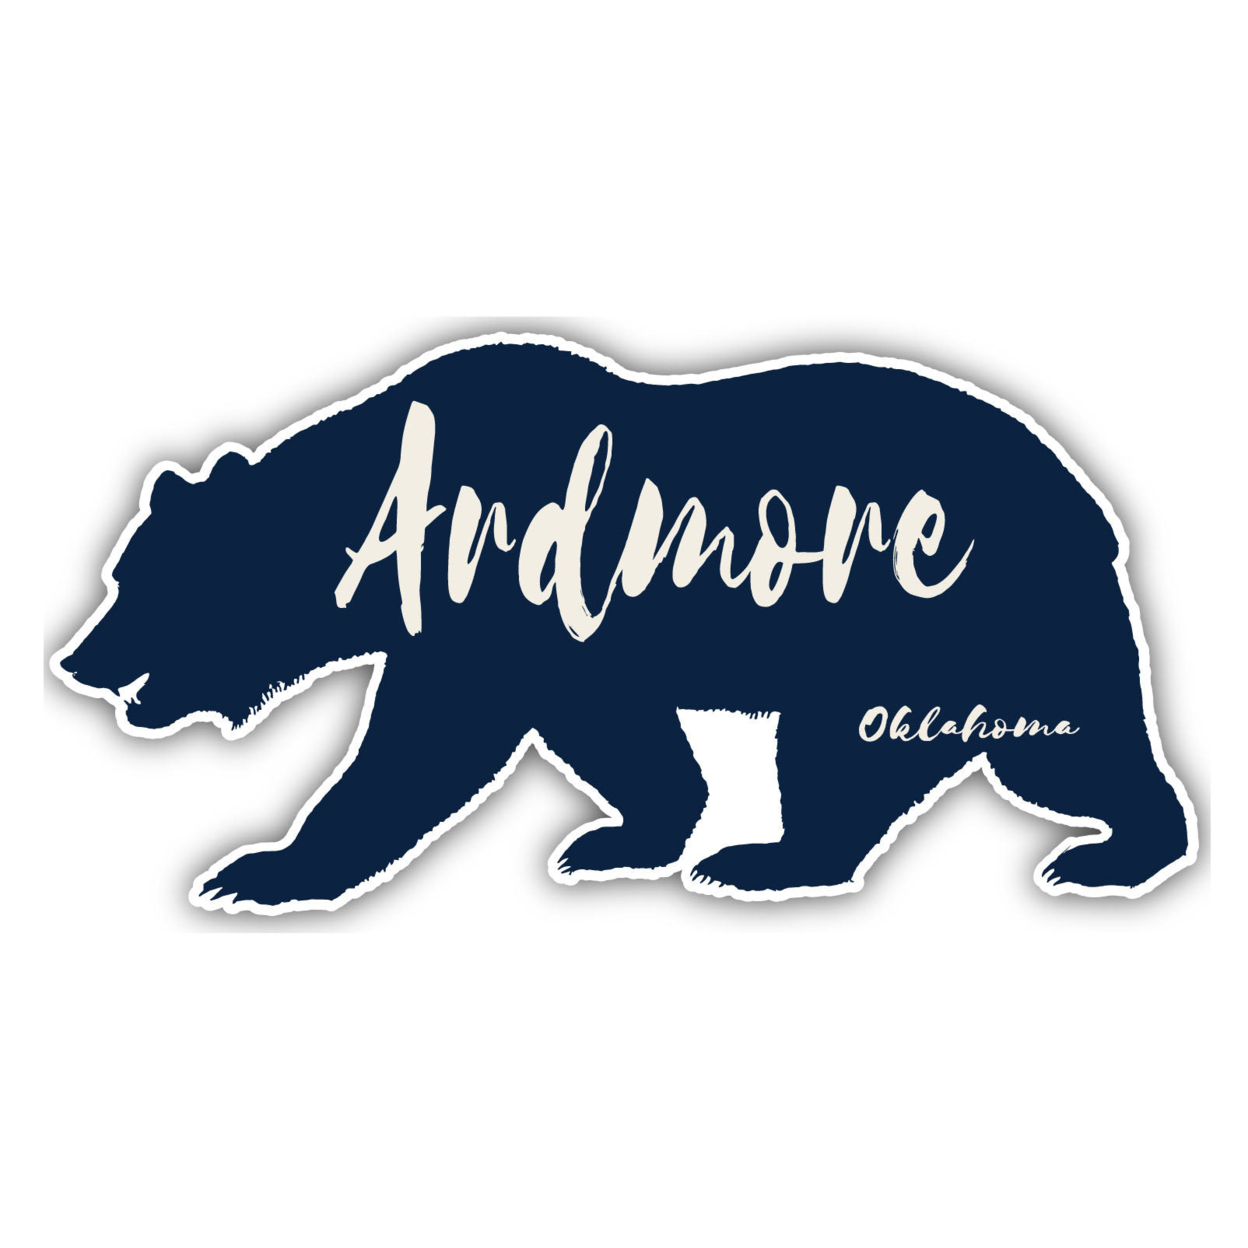 Ardmore Oklahoma Souvenir Decorative Stickers (Choose Theme And Size) - 4-Pack, 12-Inch, Adventures Awaits